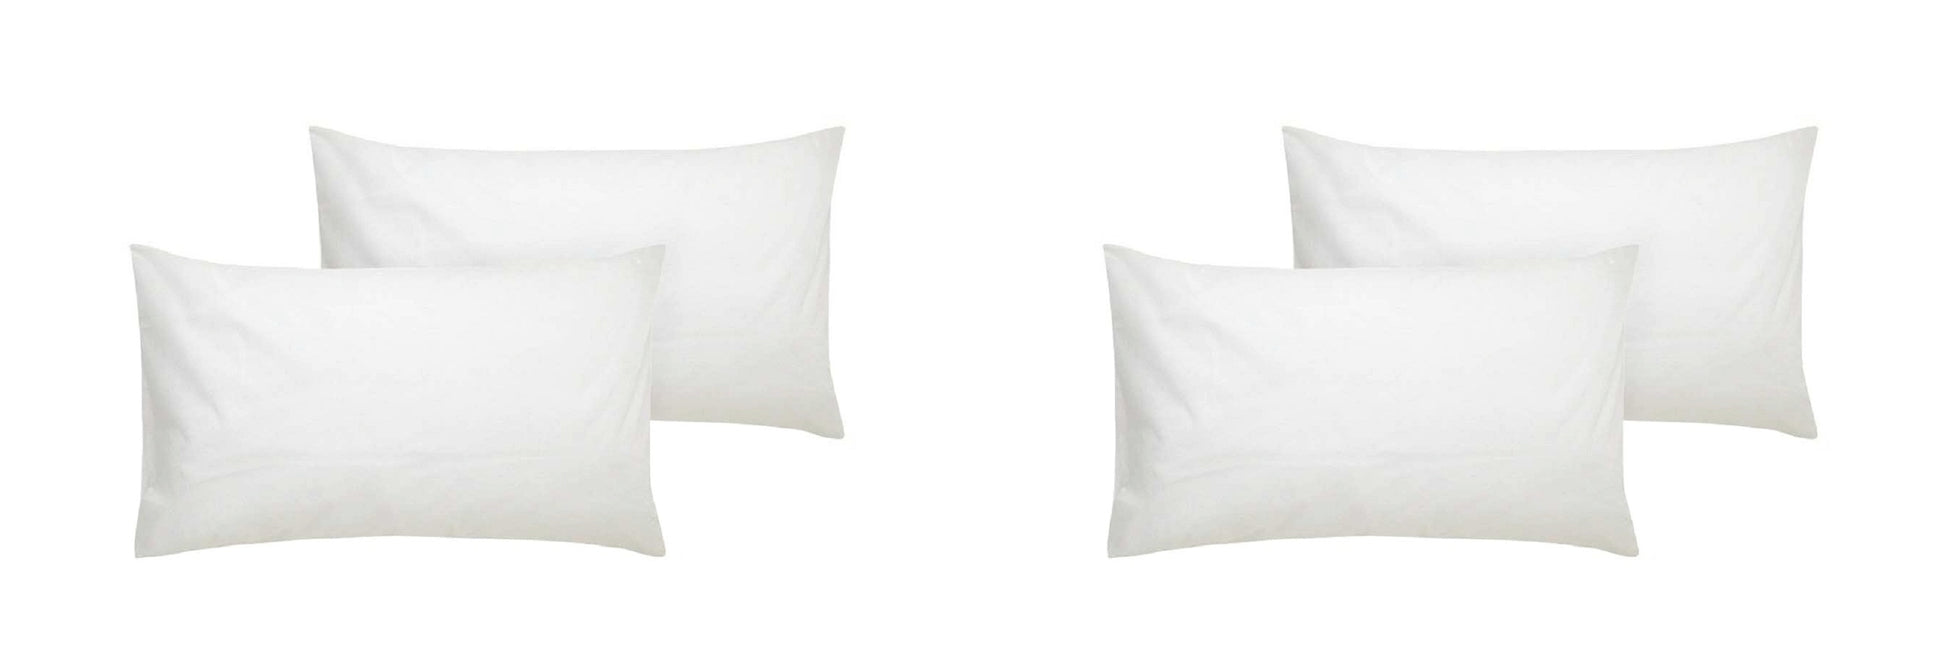 Luxurious Ultra Soft Microfiber Pillows for Sleeping White Set of 4 - JDX STORE